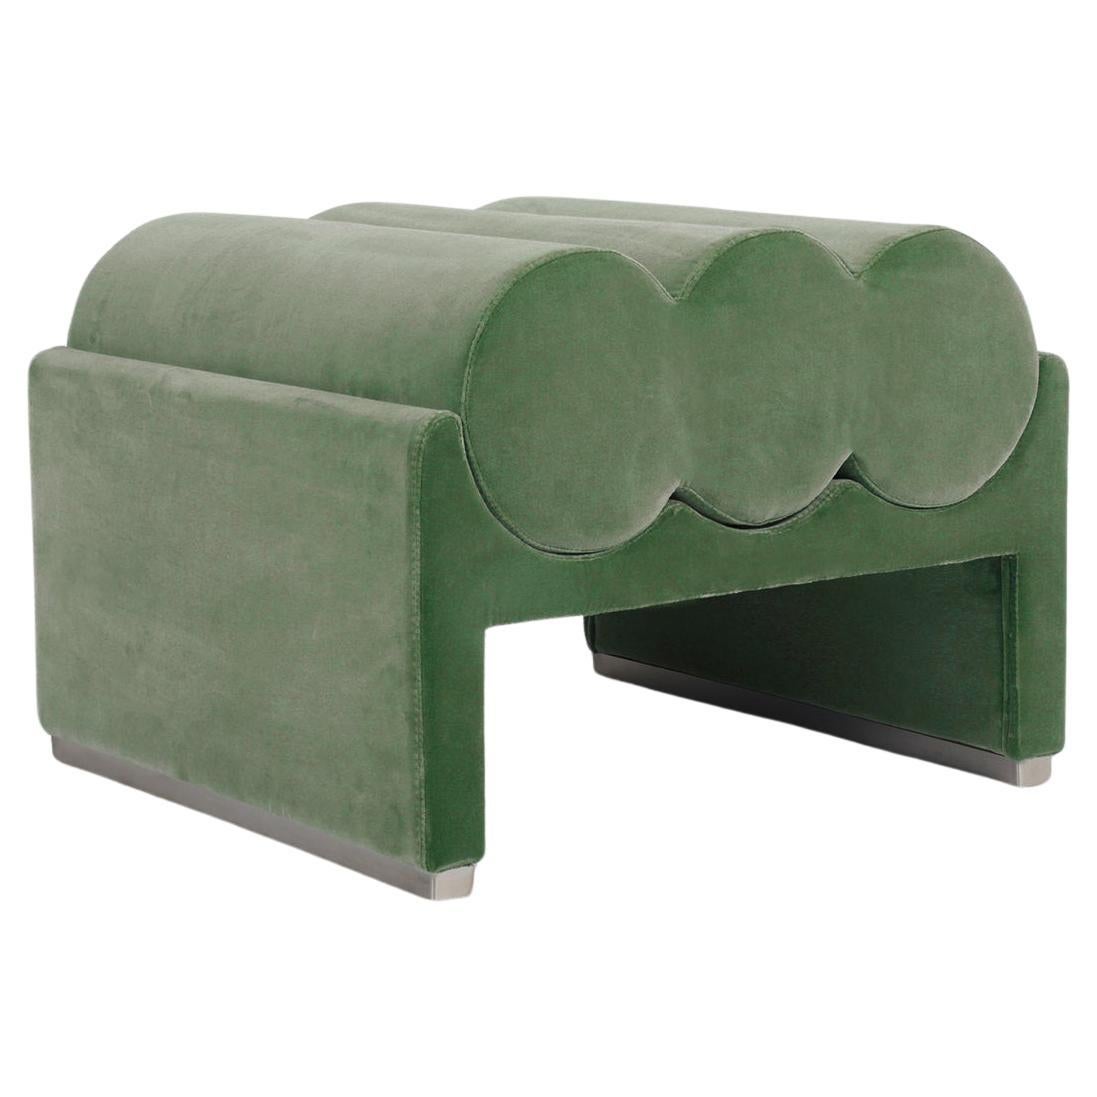 Green Kyl pouf by Dalmoto For Sale